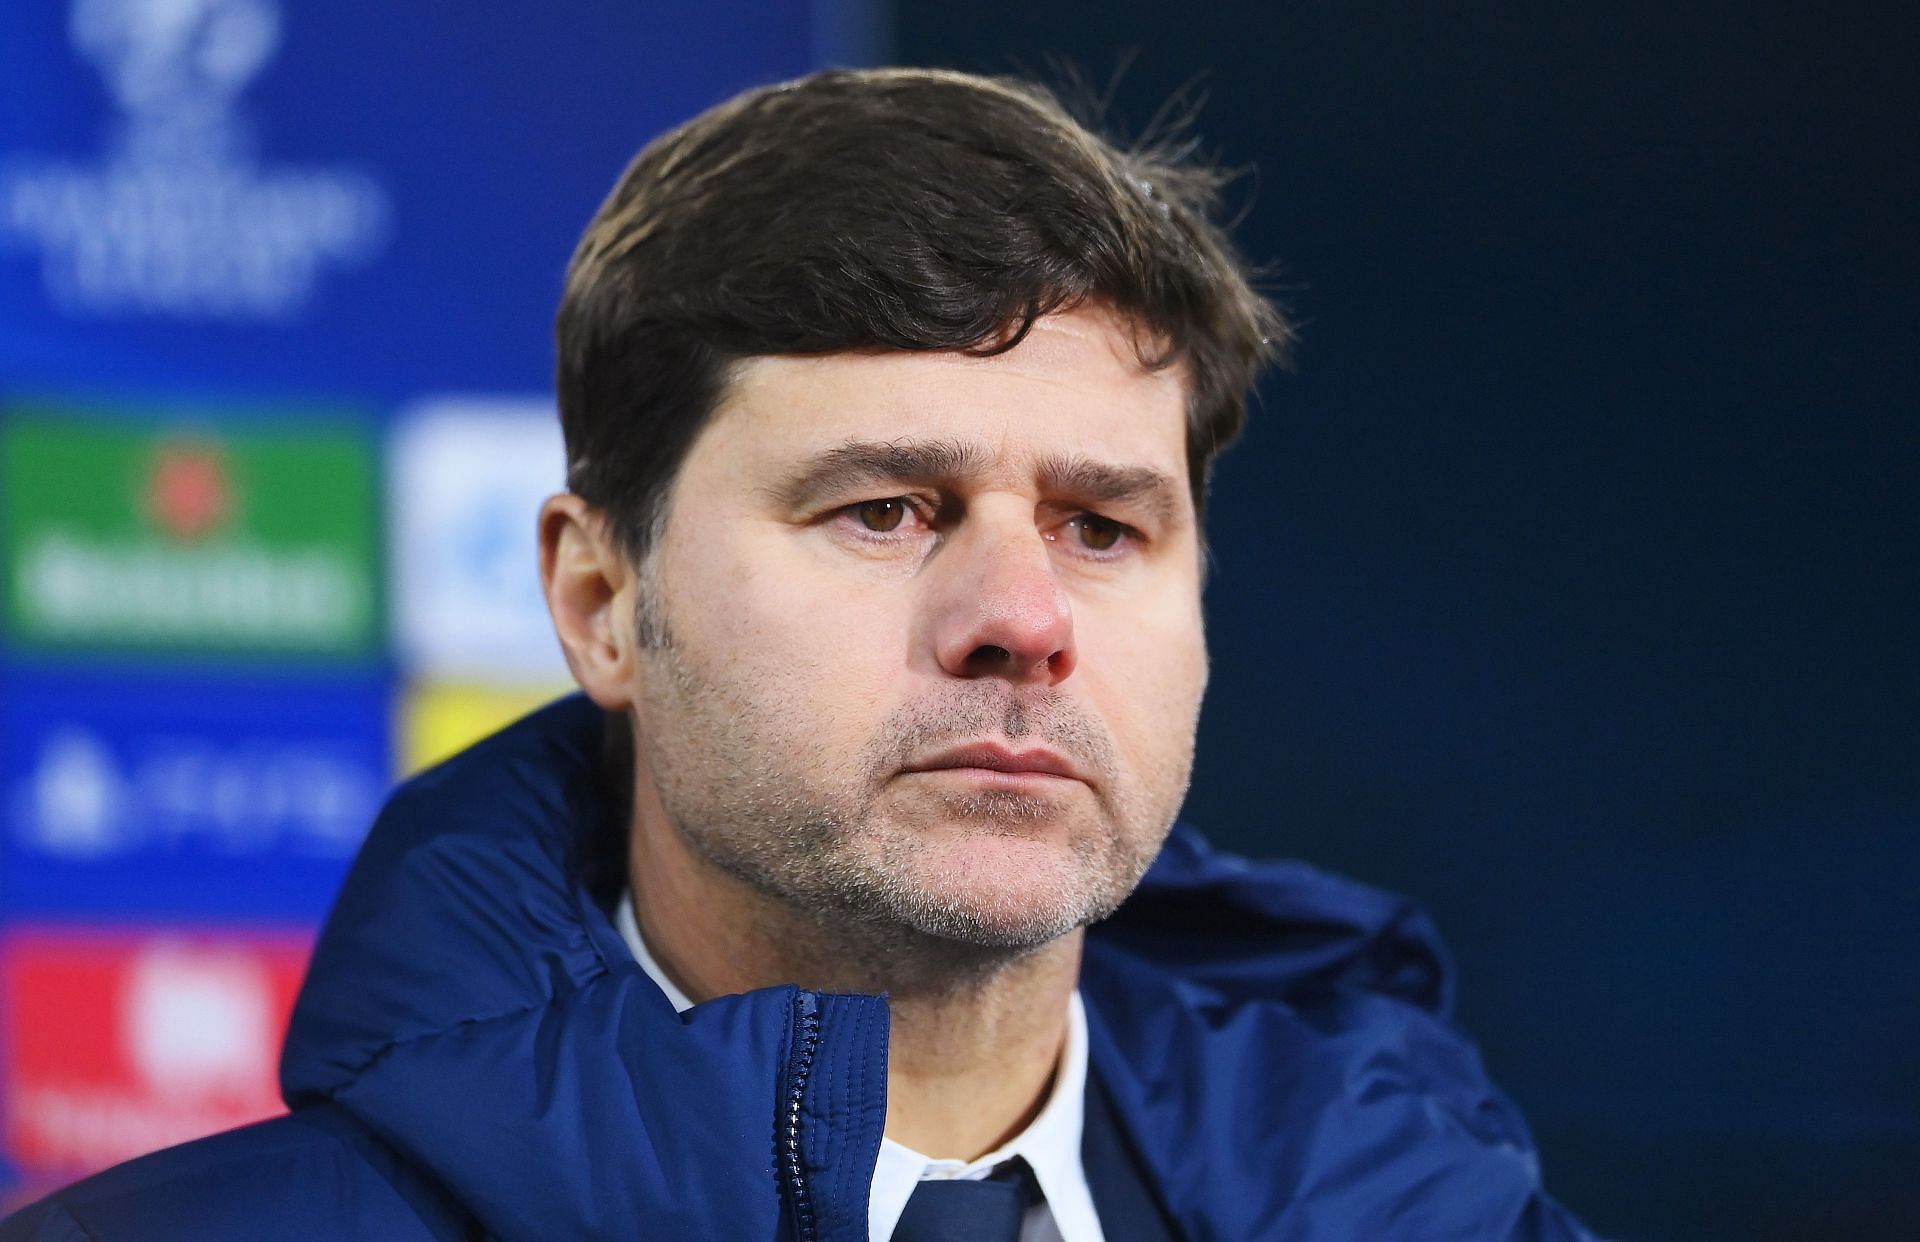 PSG manager Mauricio Pochettino. (Photo by Laurence Griffiths/Getty Images)